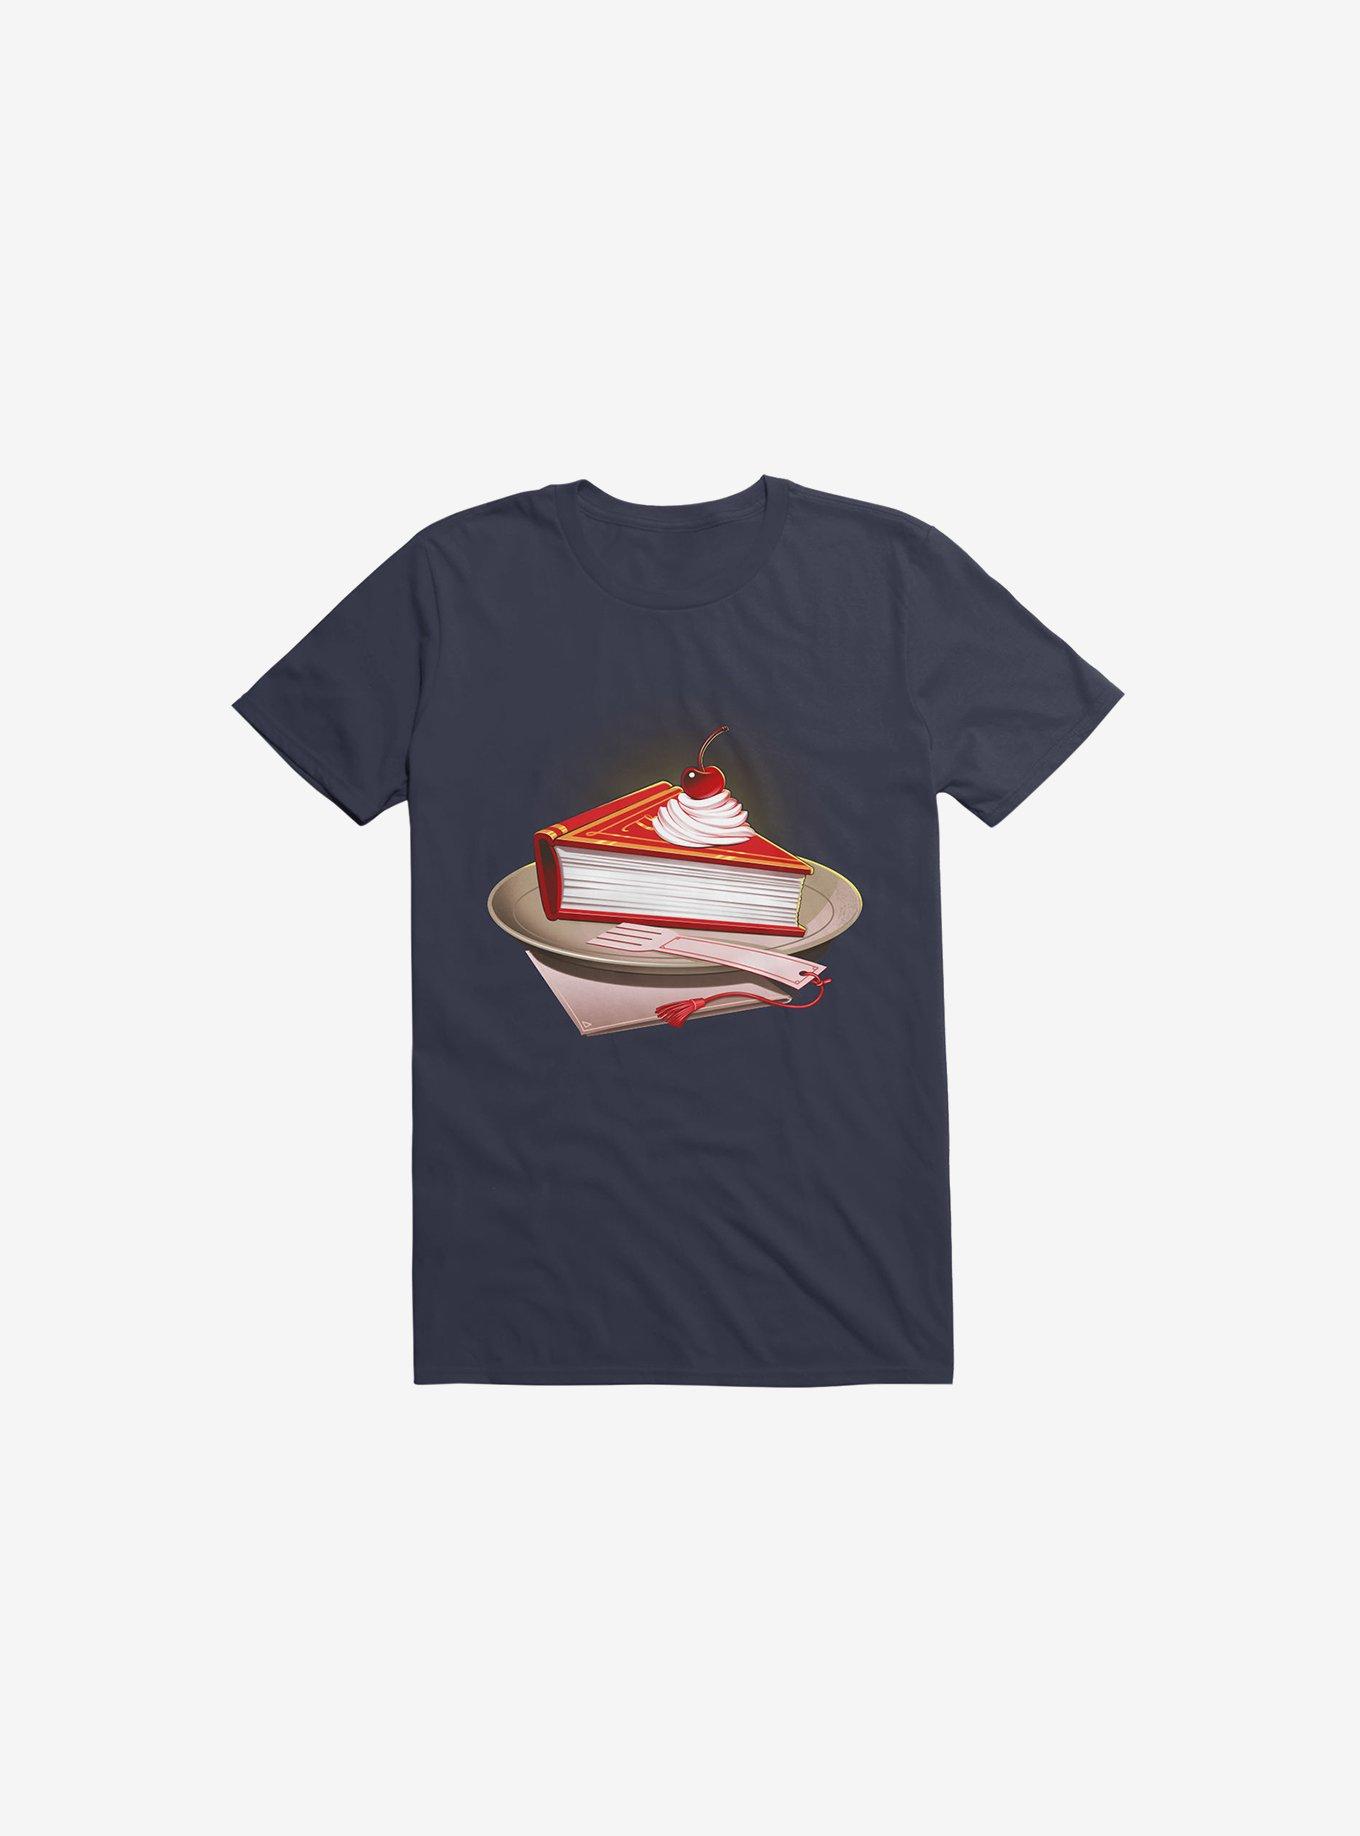 Food For The Brain Navy Blue T-Shirt